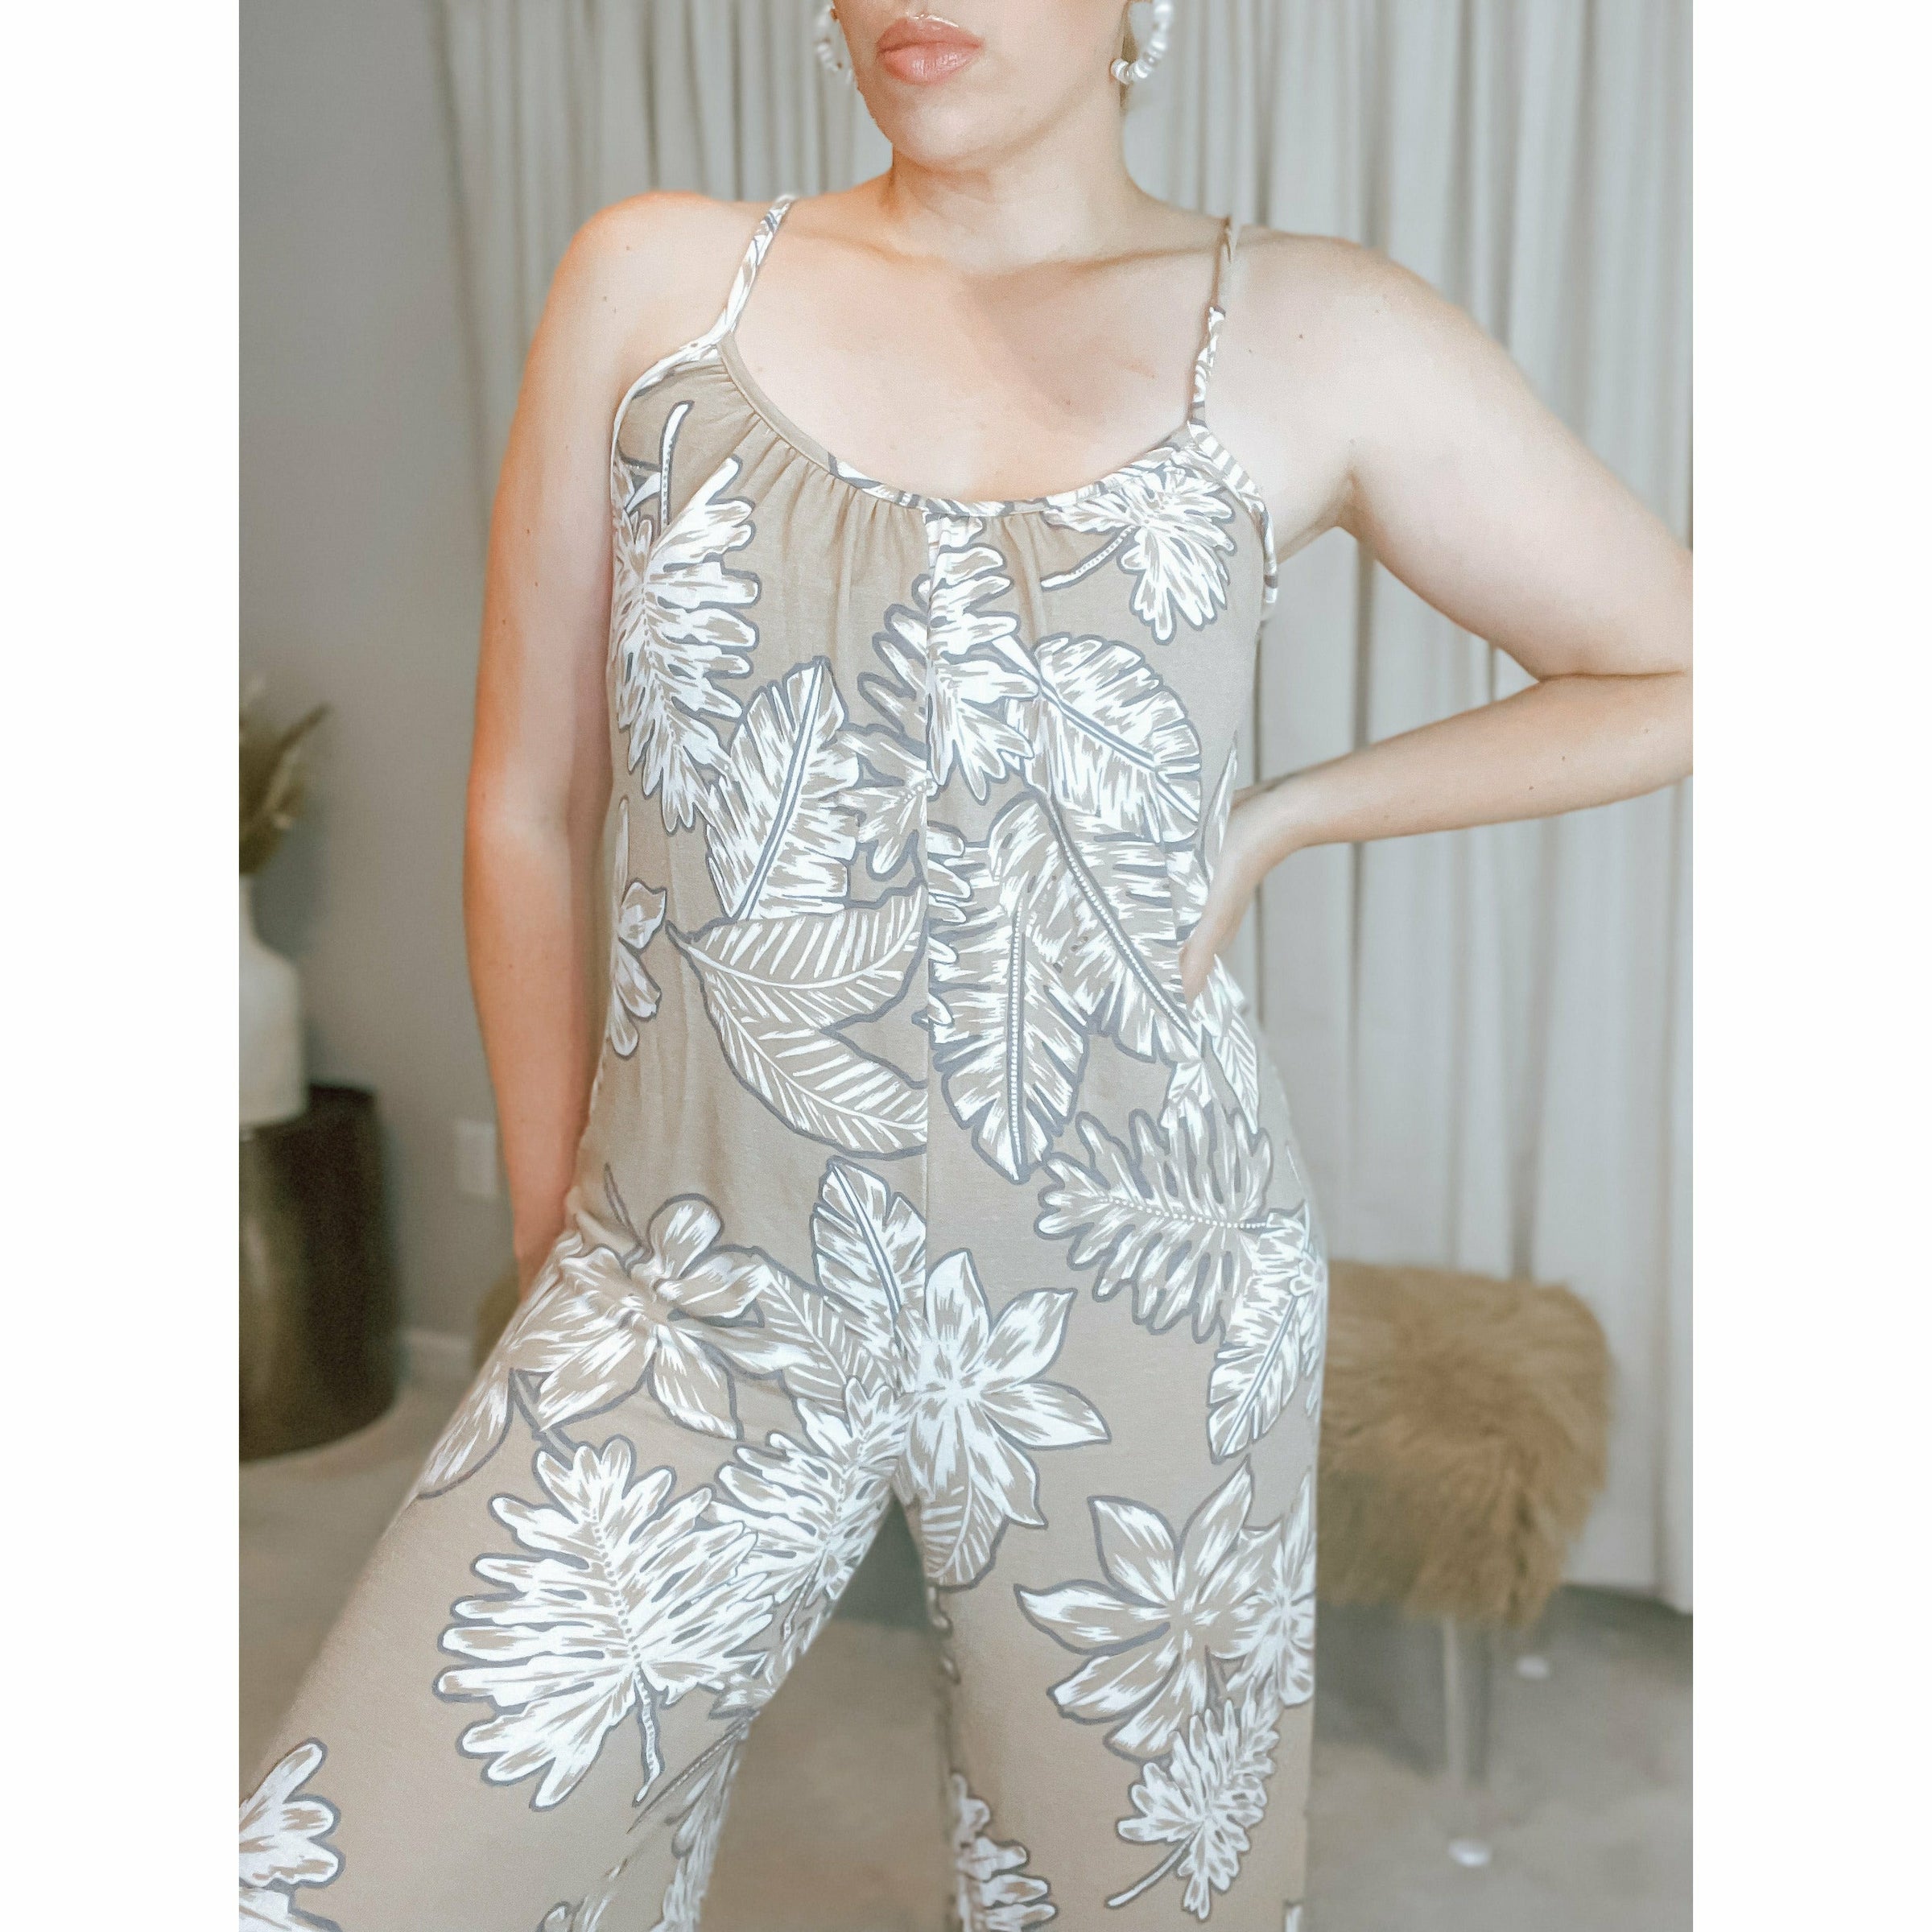 Meredith Romper - The Hive by Chris Jesselle